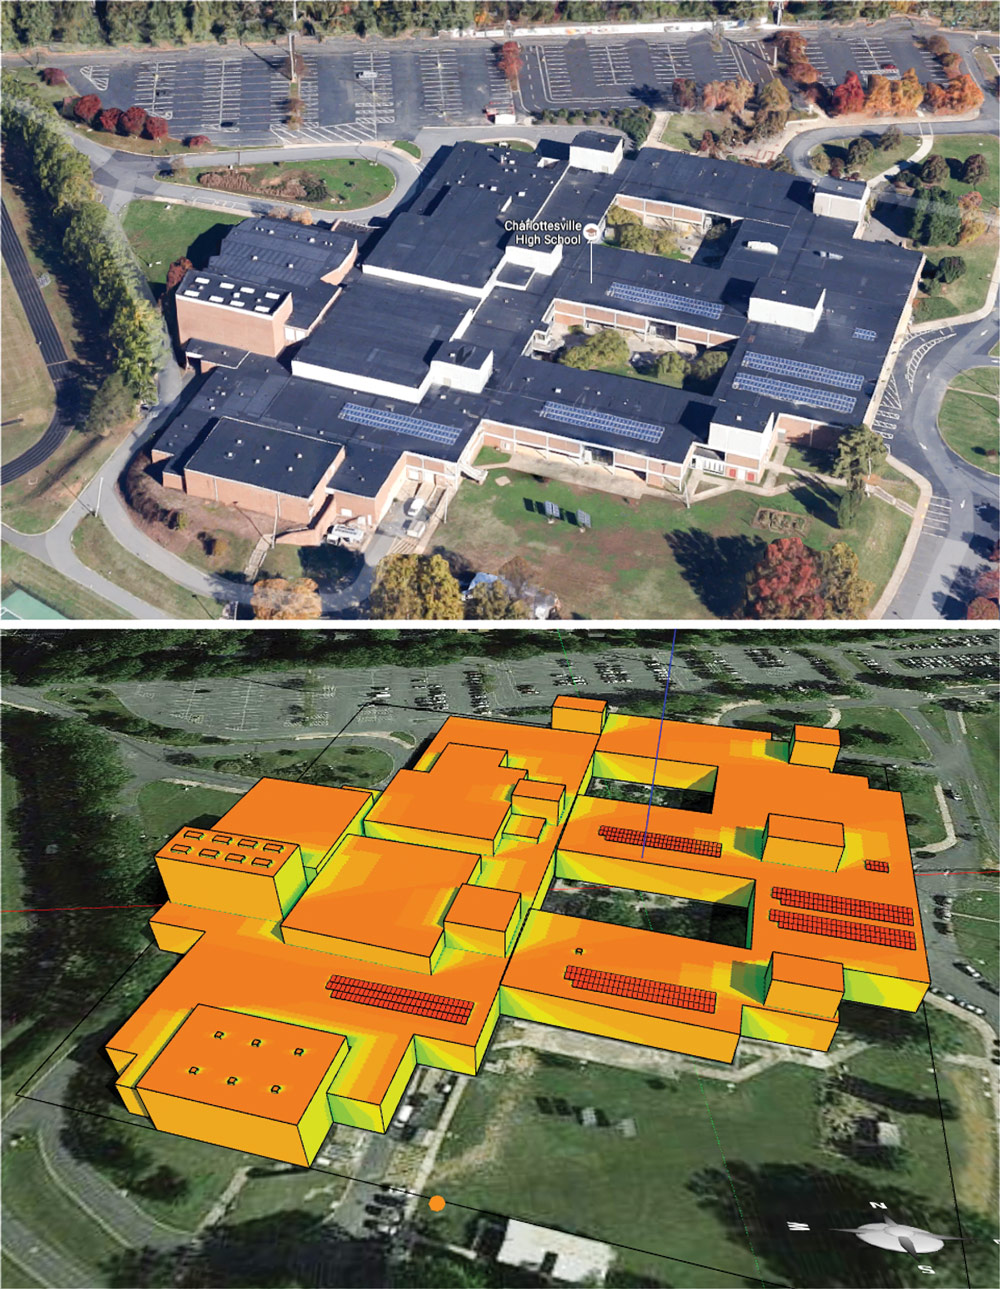 The 3D model of a school in Google Maps and Energy3D's shading visualization shows the distribution of solar radiation on the roof.